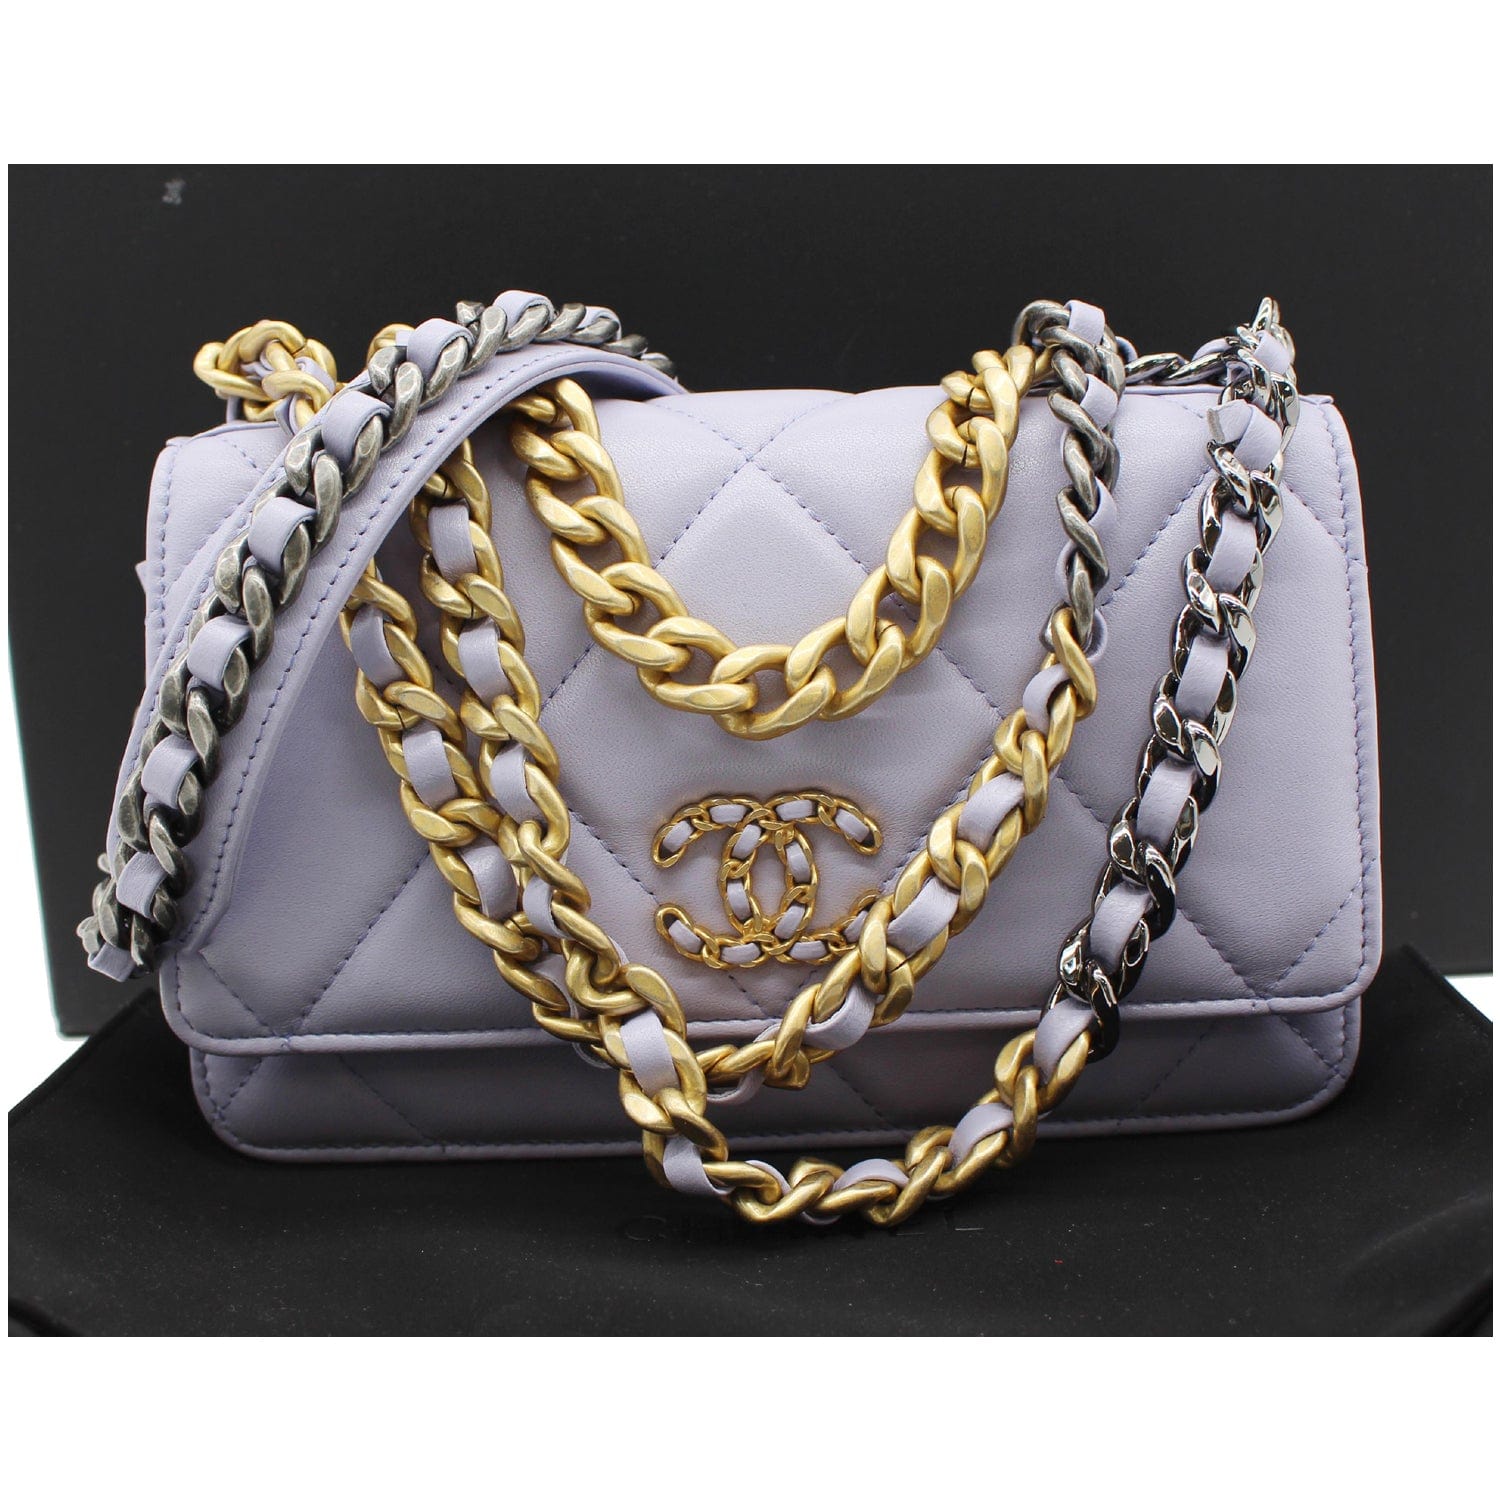 CHANEL 19 CC WOC Leather Wallet On Chain Crossbody Bag Light Lavender